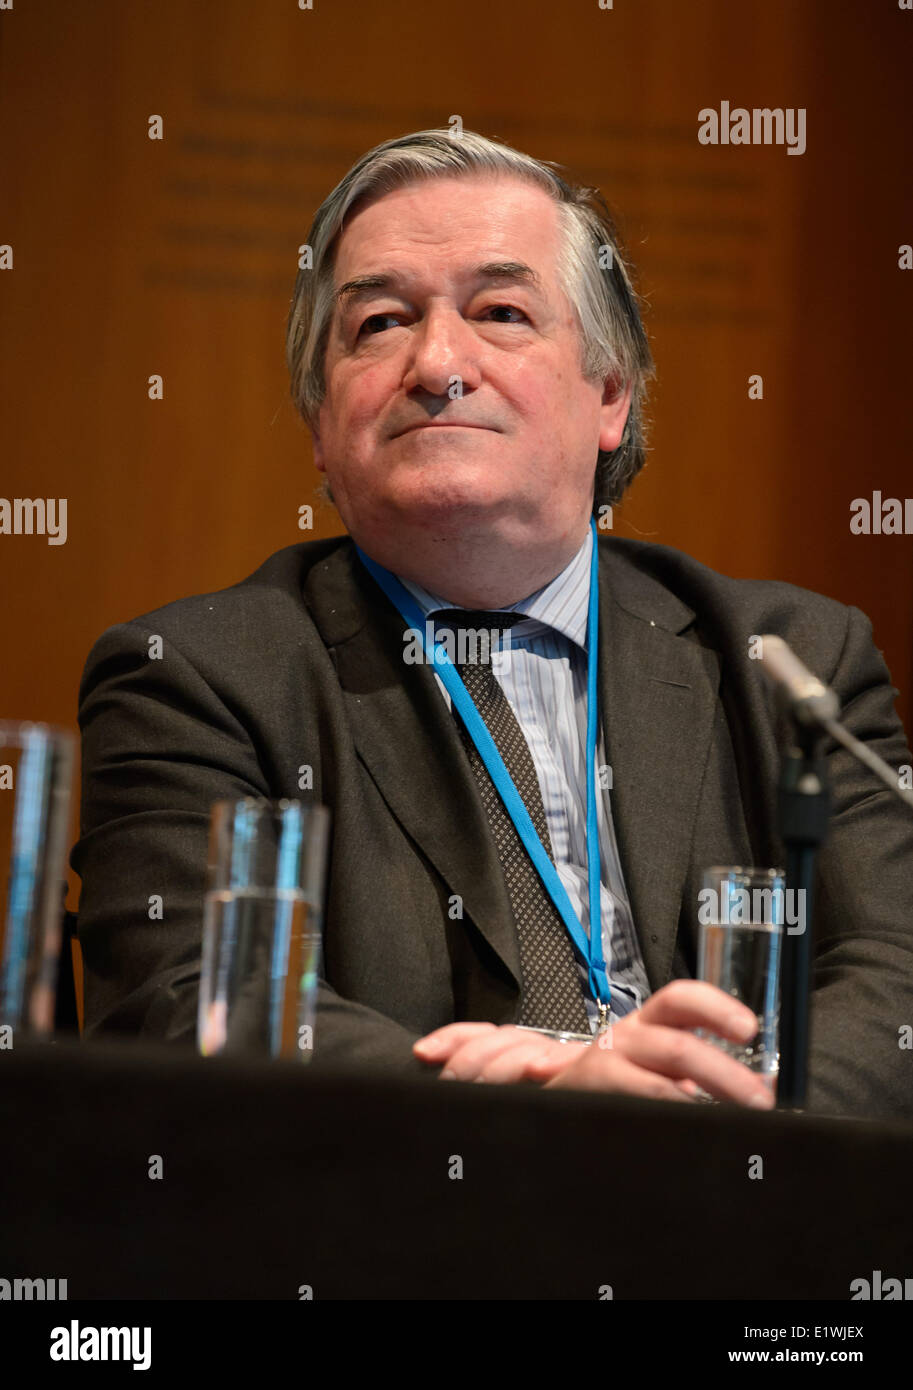 The Right Honourable Sir James Munby, President of the High Court of England and Wales speaking at the British Association of Social Workers (BASW) AGM and Conference in London. LSO, Jerwood Hall, London. 10th June 2014. Stock Photo